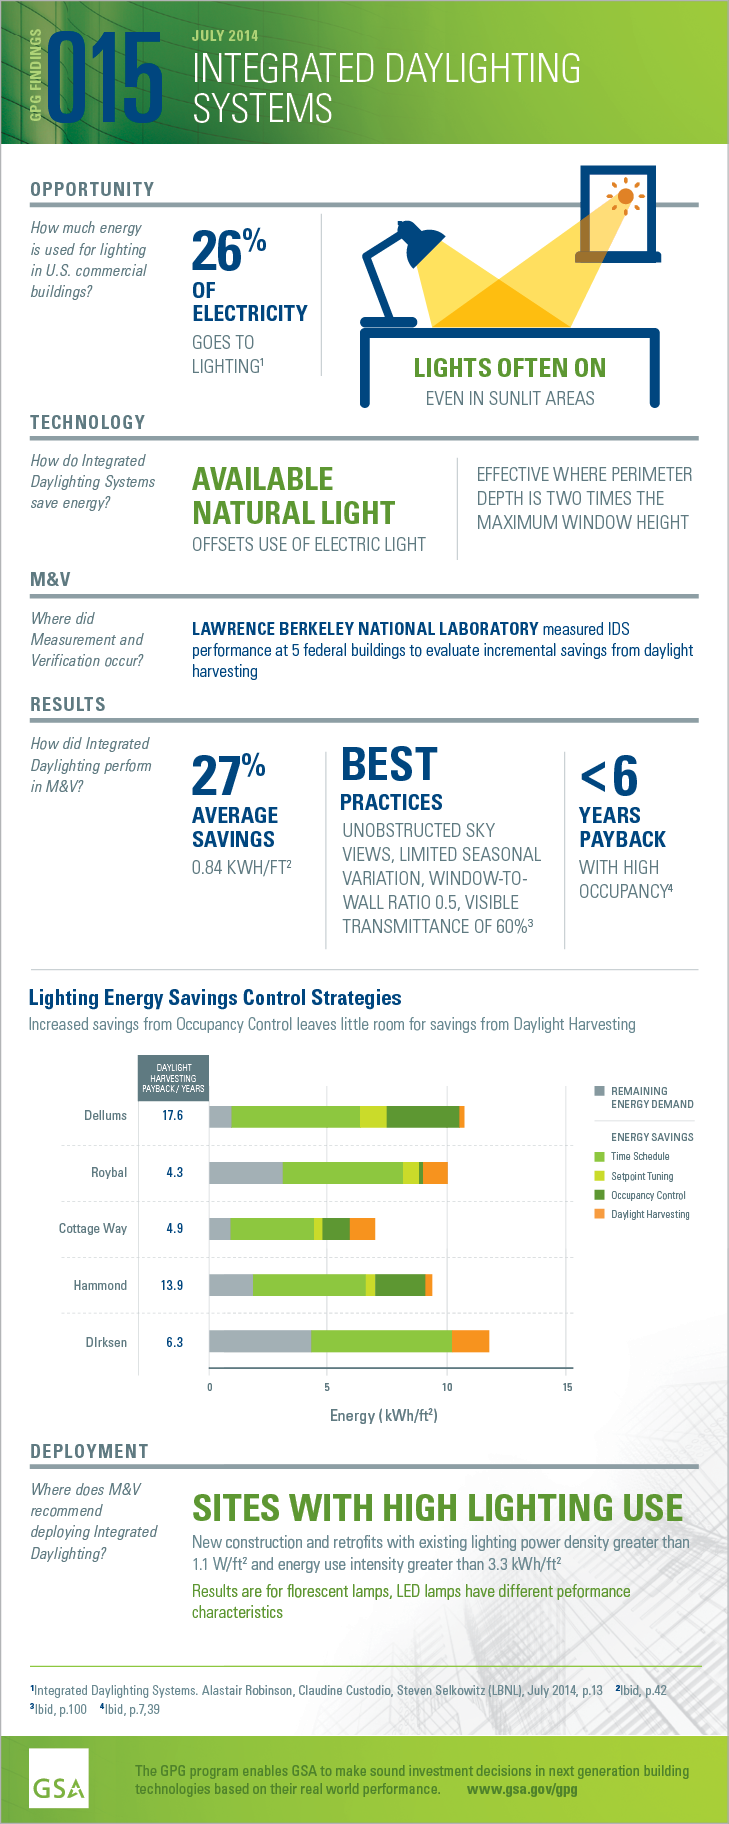 Download the PDF version of the full-sized infographic for GPG015 Integrated Daylighting.